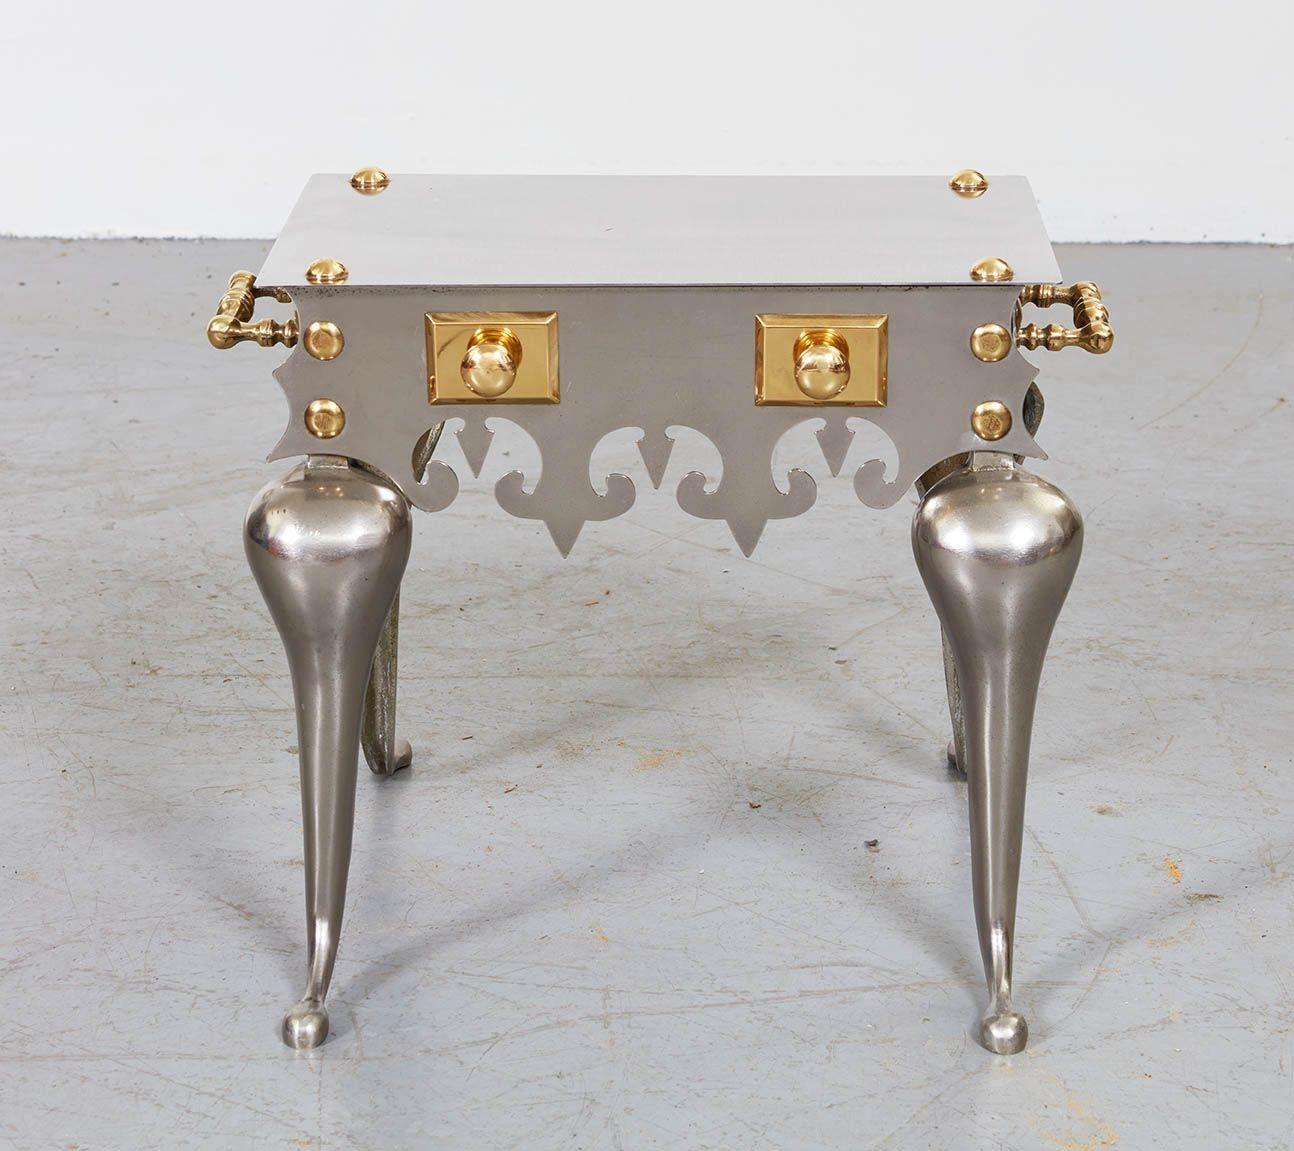 Heavy Gilded-Age drinks table or trivet made of polished steel in the gothic manner with flamboyant cabriole legs and brushed steel top featuring fleur-de-lys cut apron and elaborate brass detailing including turned handles, rivets and decorative